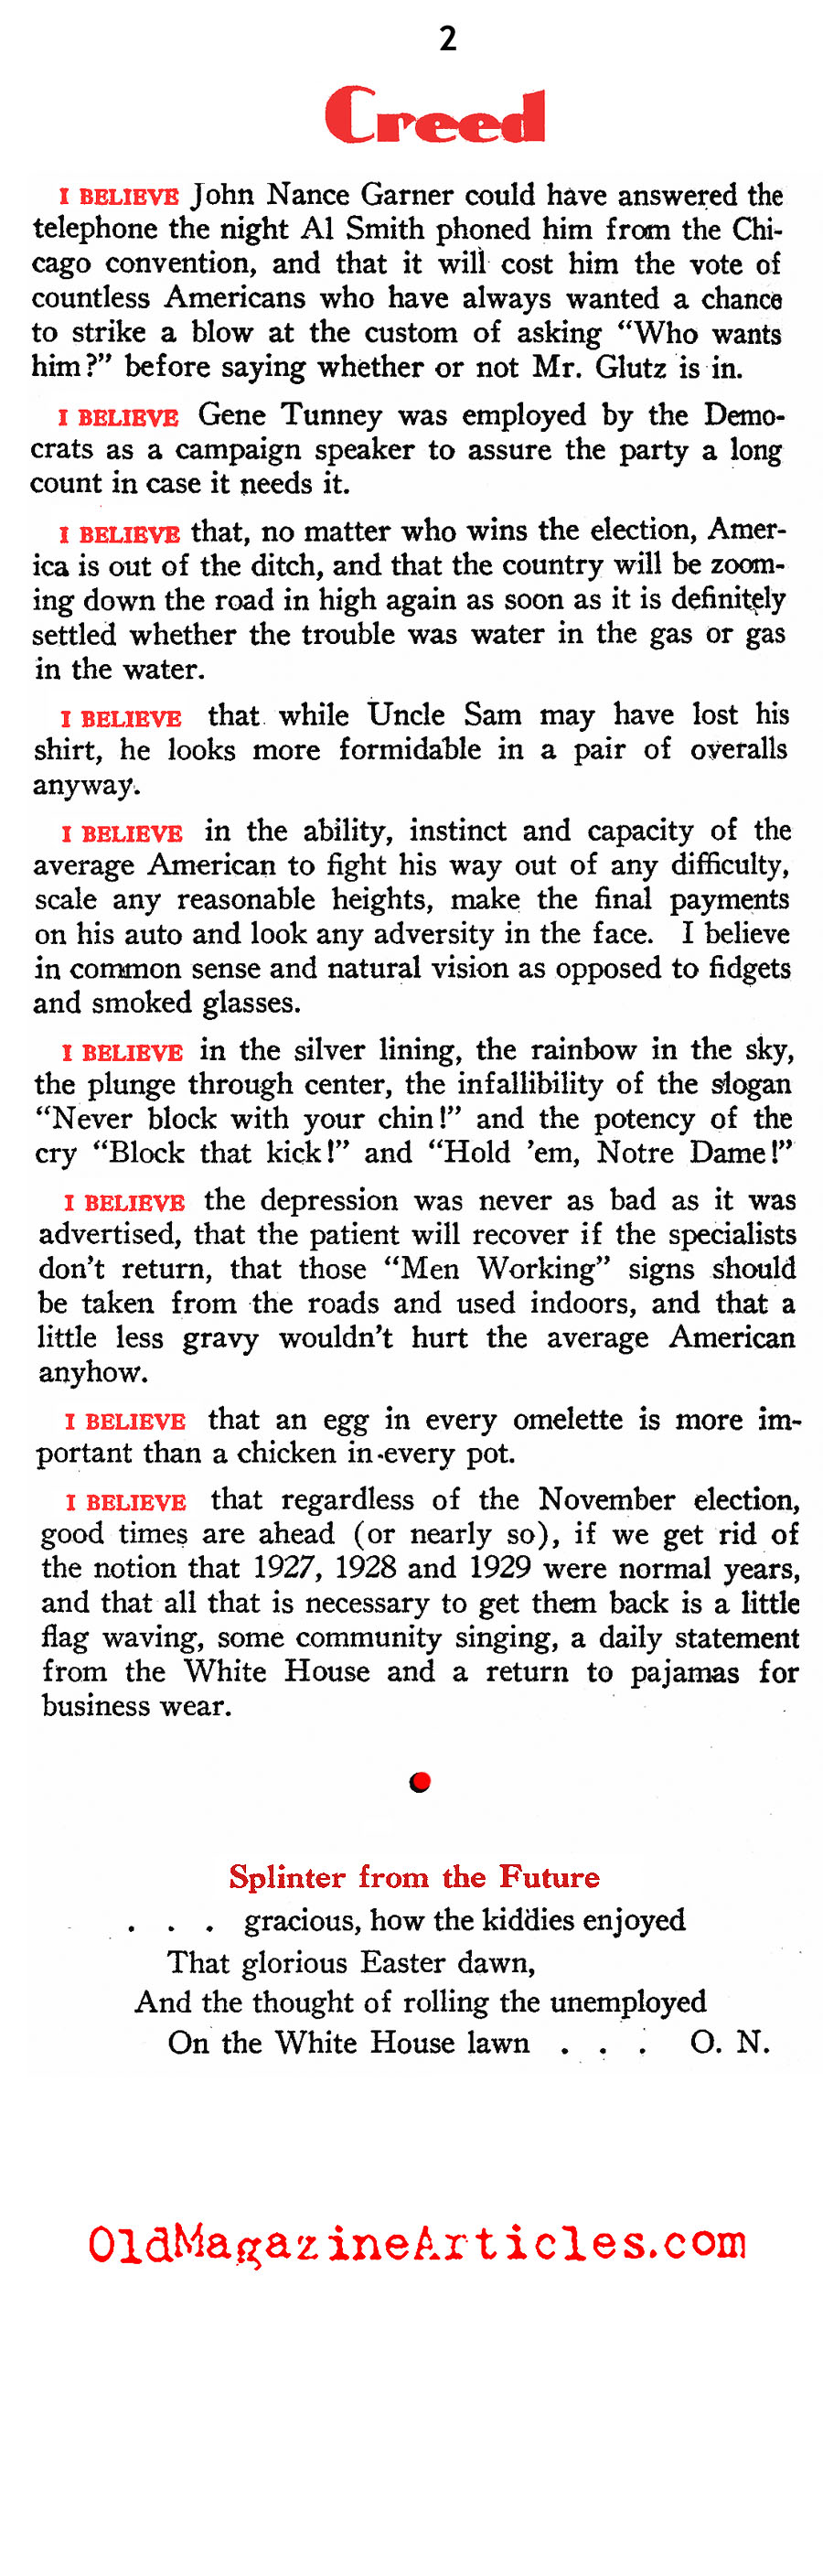 The Temper of the Electorate (The New Outlook Magazine, 1932)